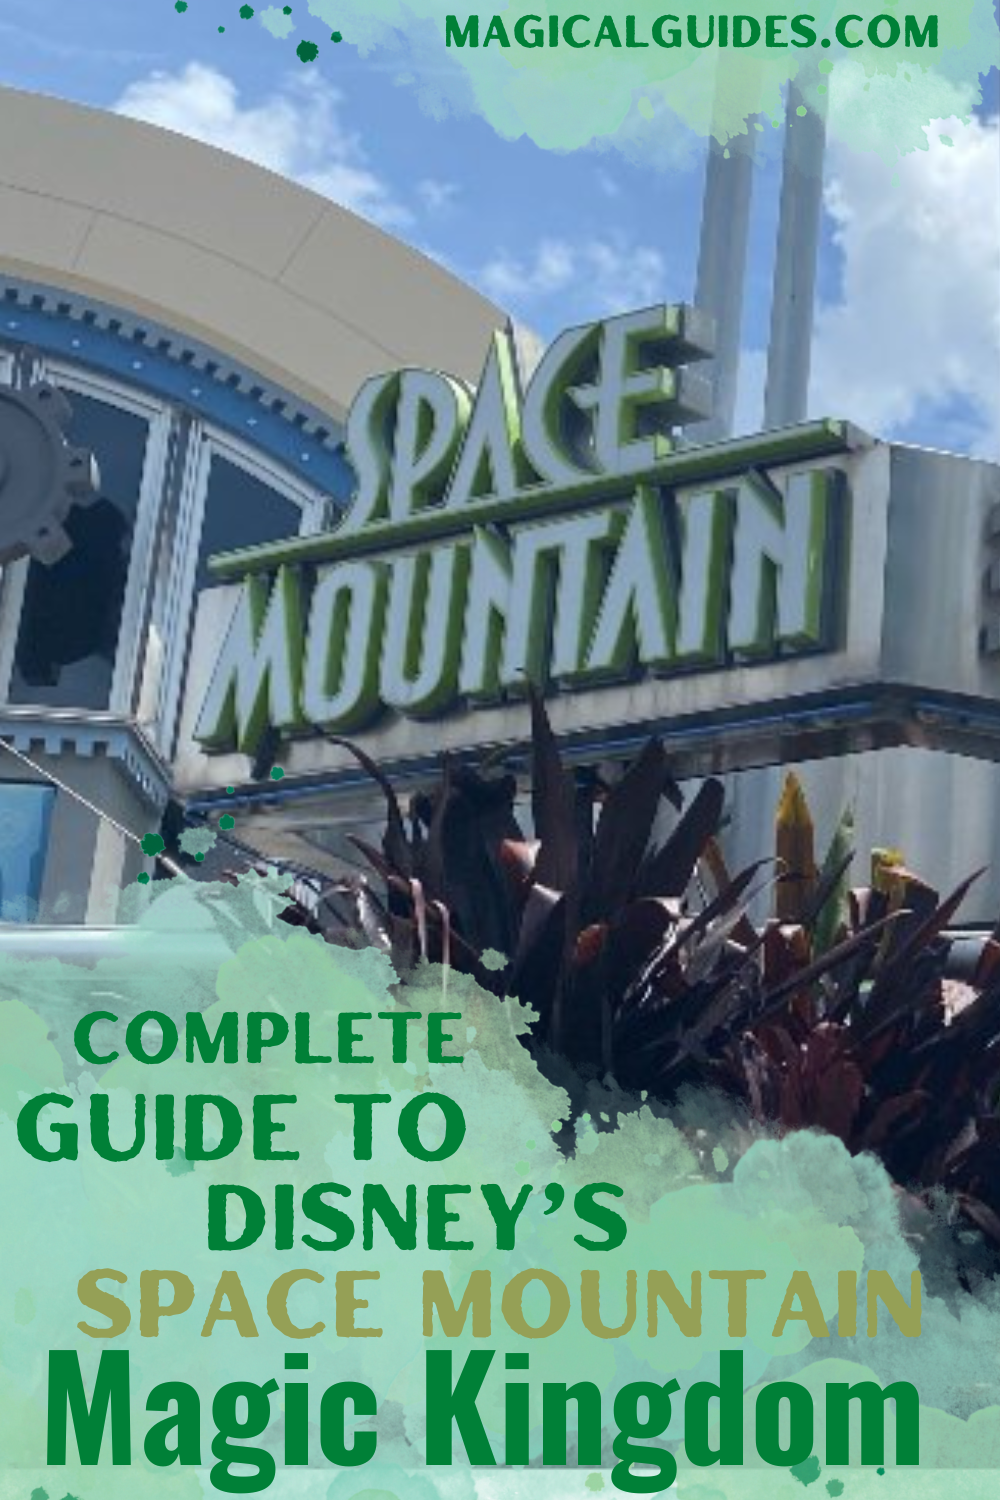 Everything you need to know about the Space Mountain Ride in Magic Kingdom. Height requirements, wait times, and tips. Is Space Mountan Scary? Find all the answers in this complete guide.